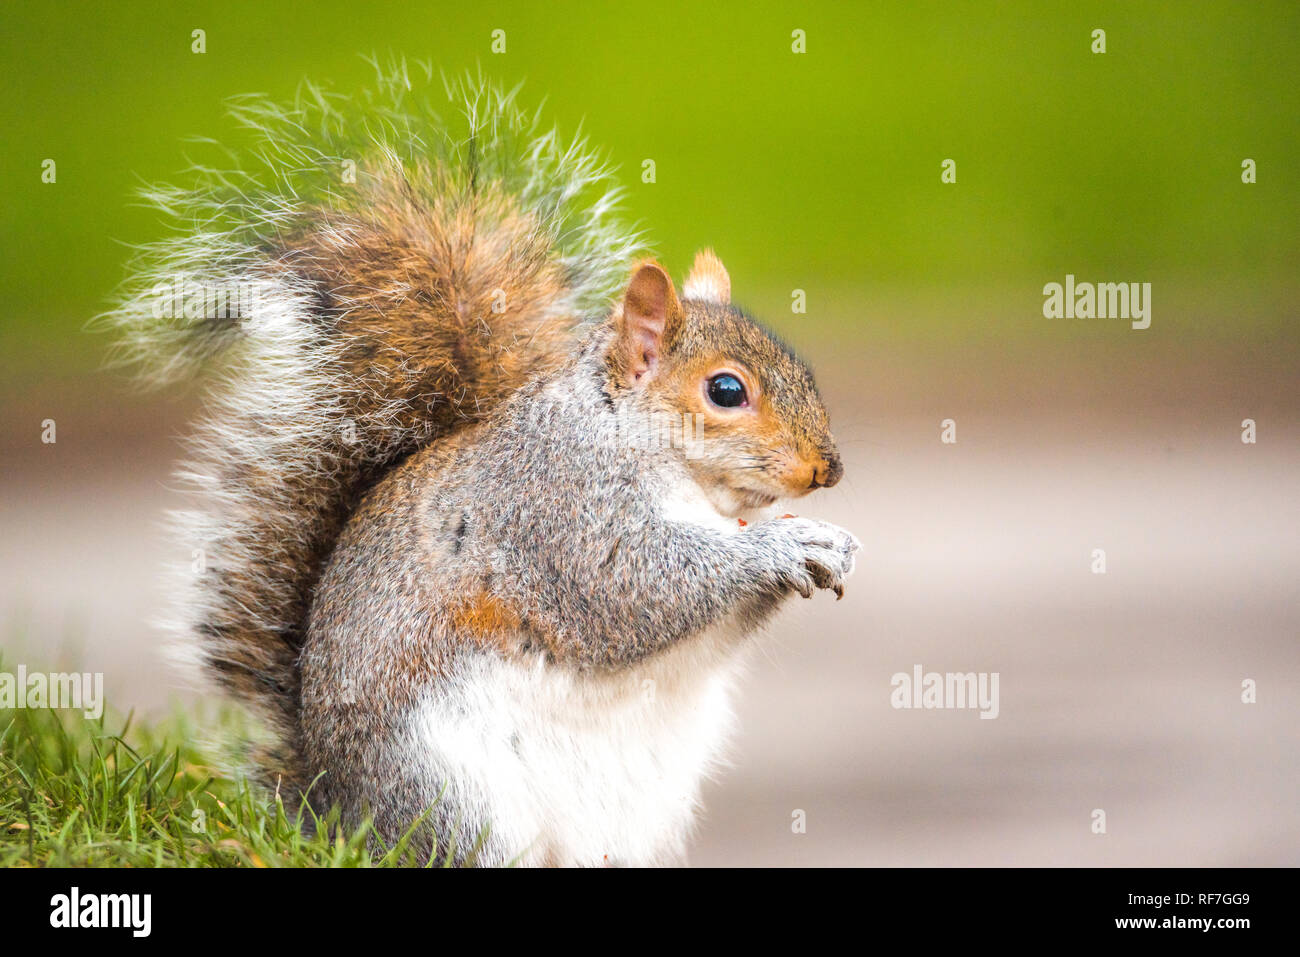 Brown squirrel eating nut closeup fluffy zoom on green grass Stock Photo